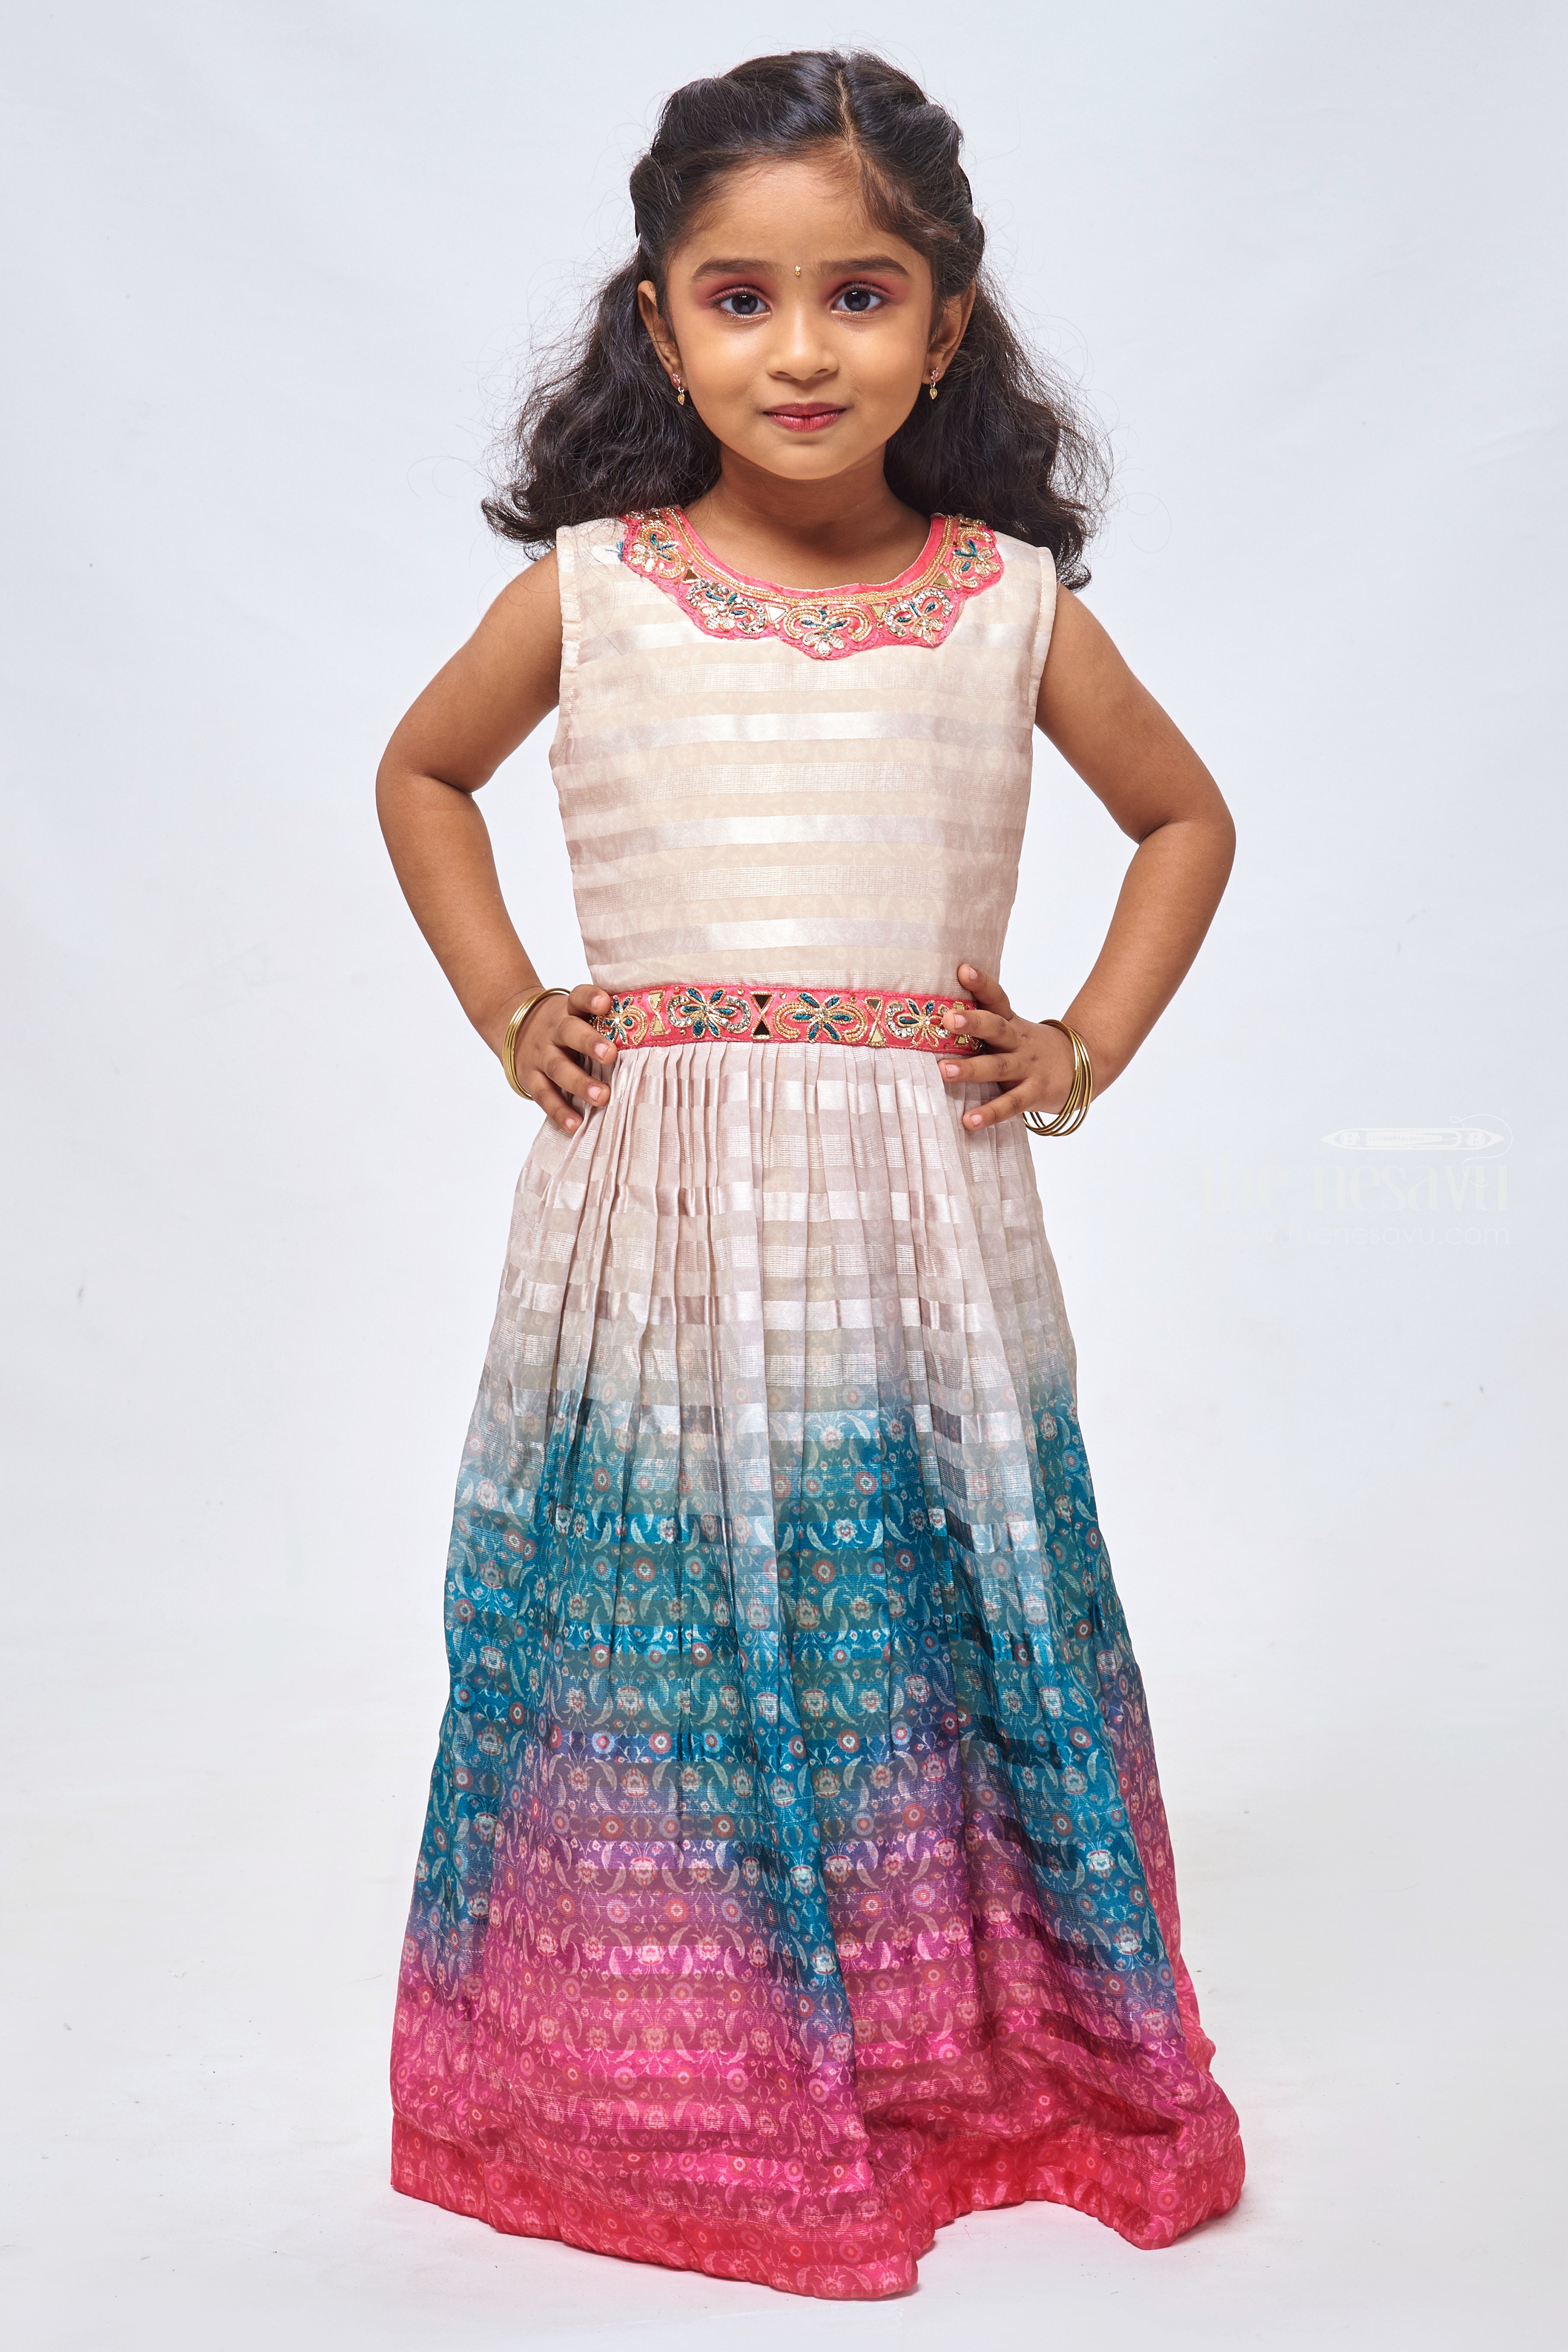 Stylish Dresses for Girls Online at Best Prices | Hopscotch